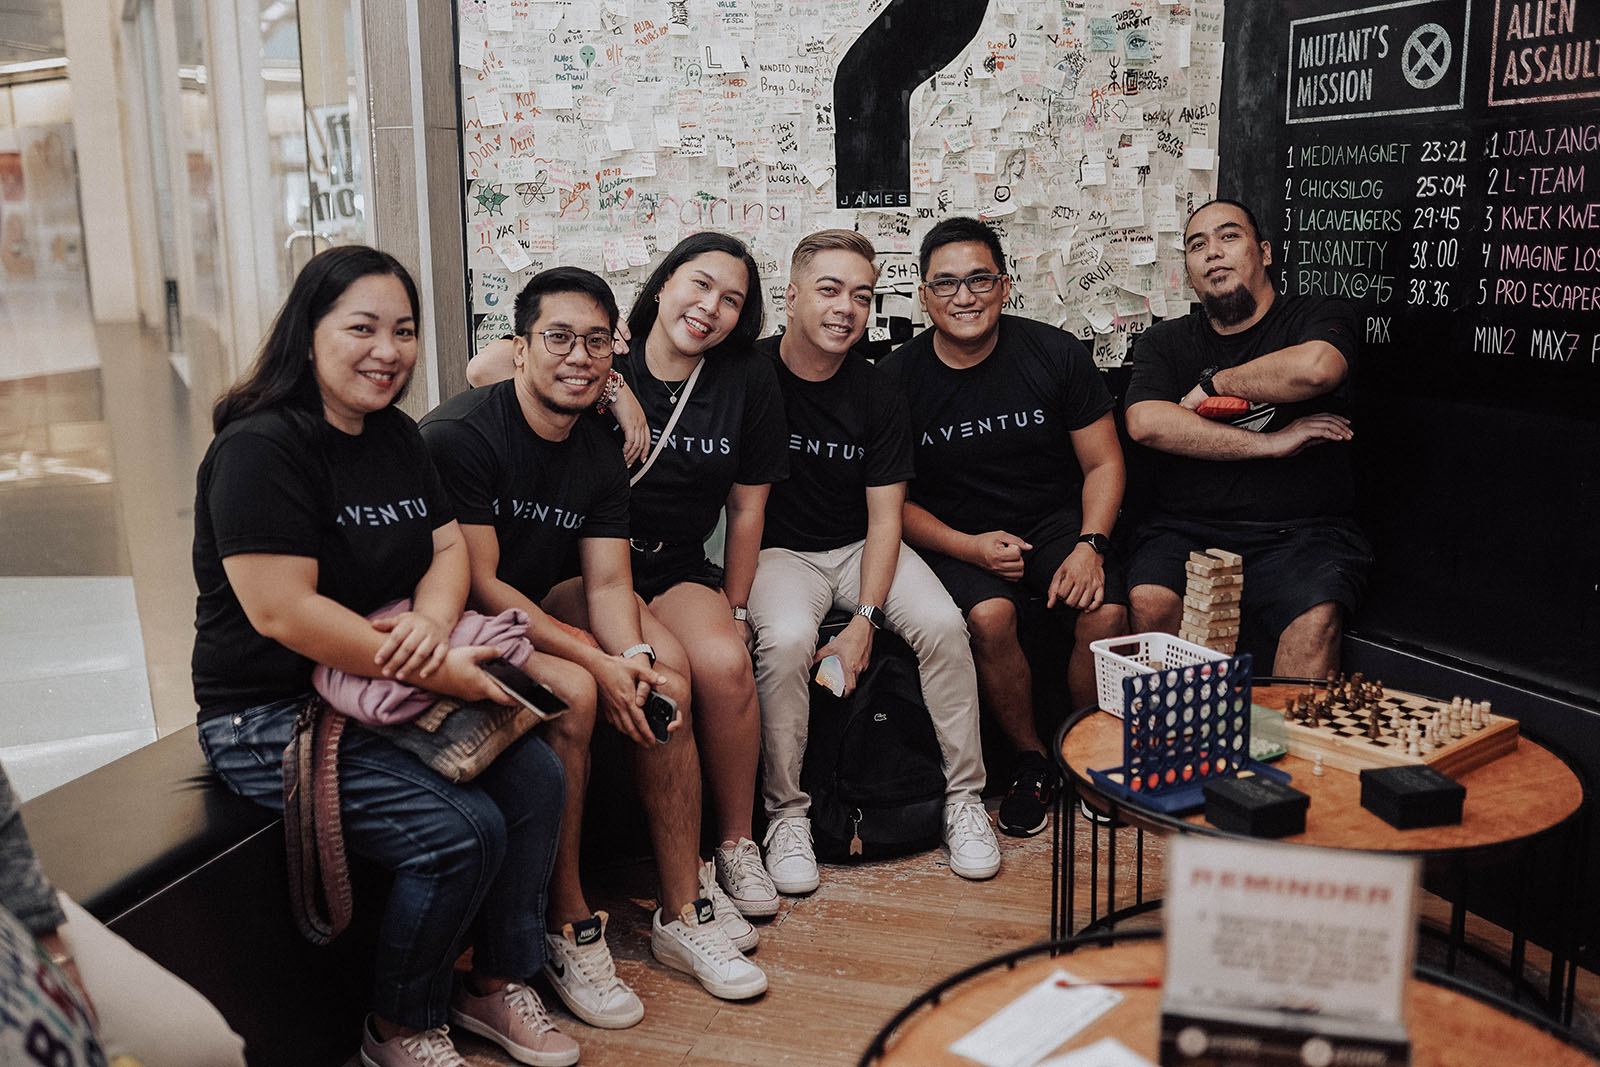 A few members from the Aventus Philippines team sitting at a waiting room before entering a mystery room. Team bonding activity.